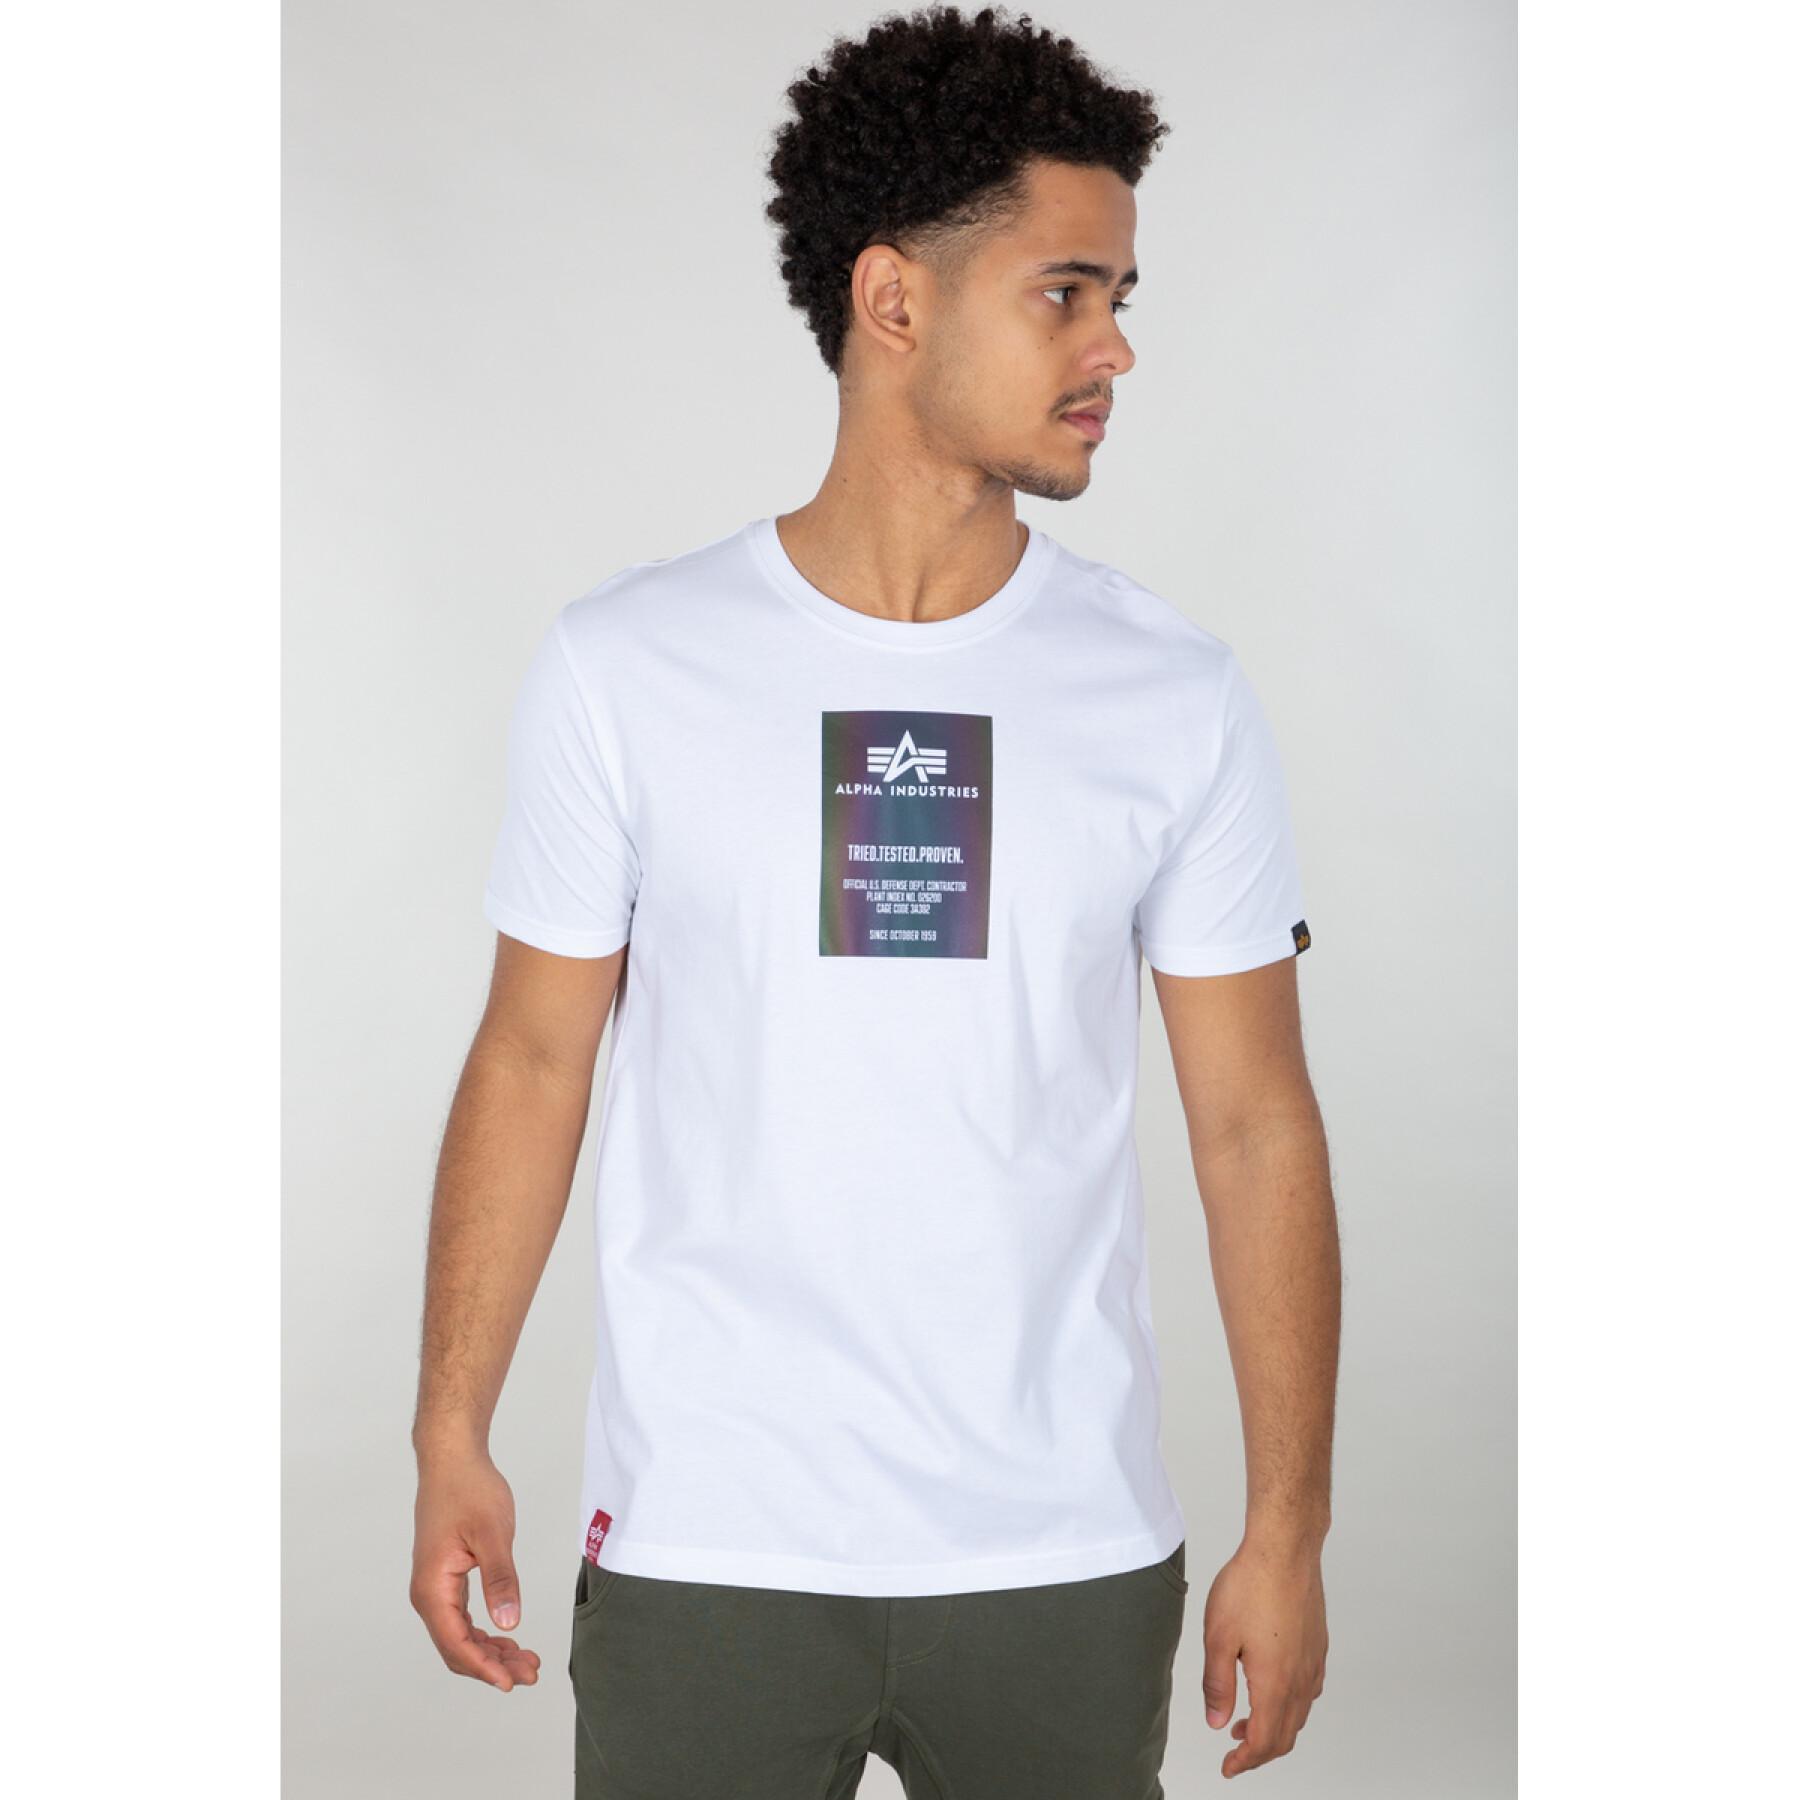 T-shirt Alpha Reflective Rainbow T-shirts - Industries and - Man - Polo Lifestyle shirts Label